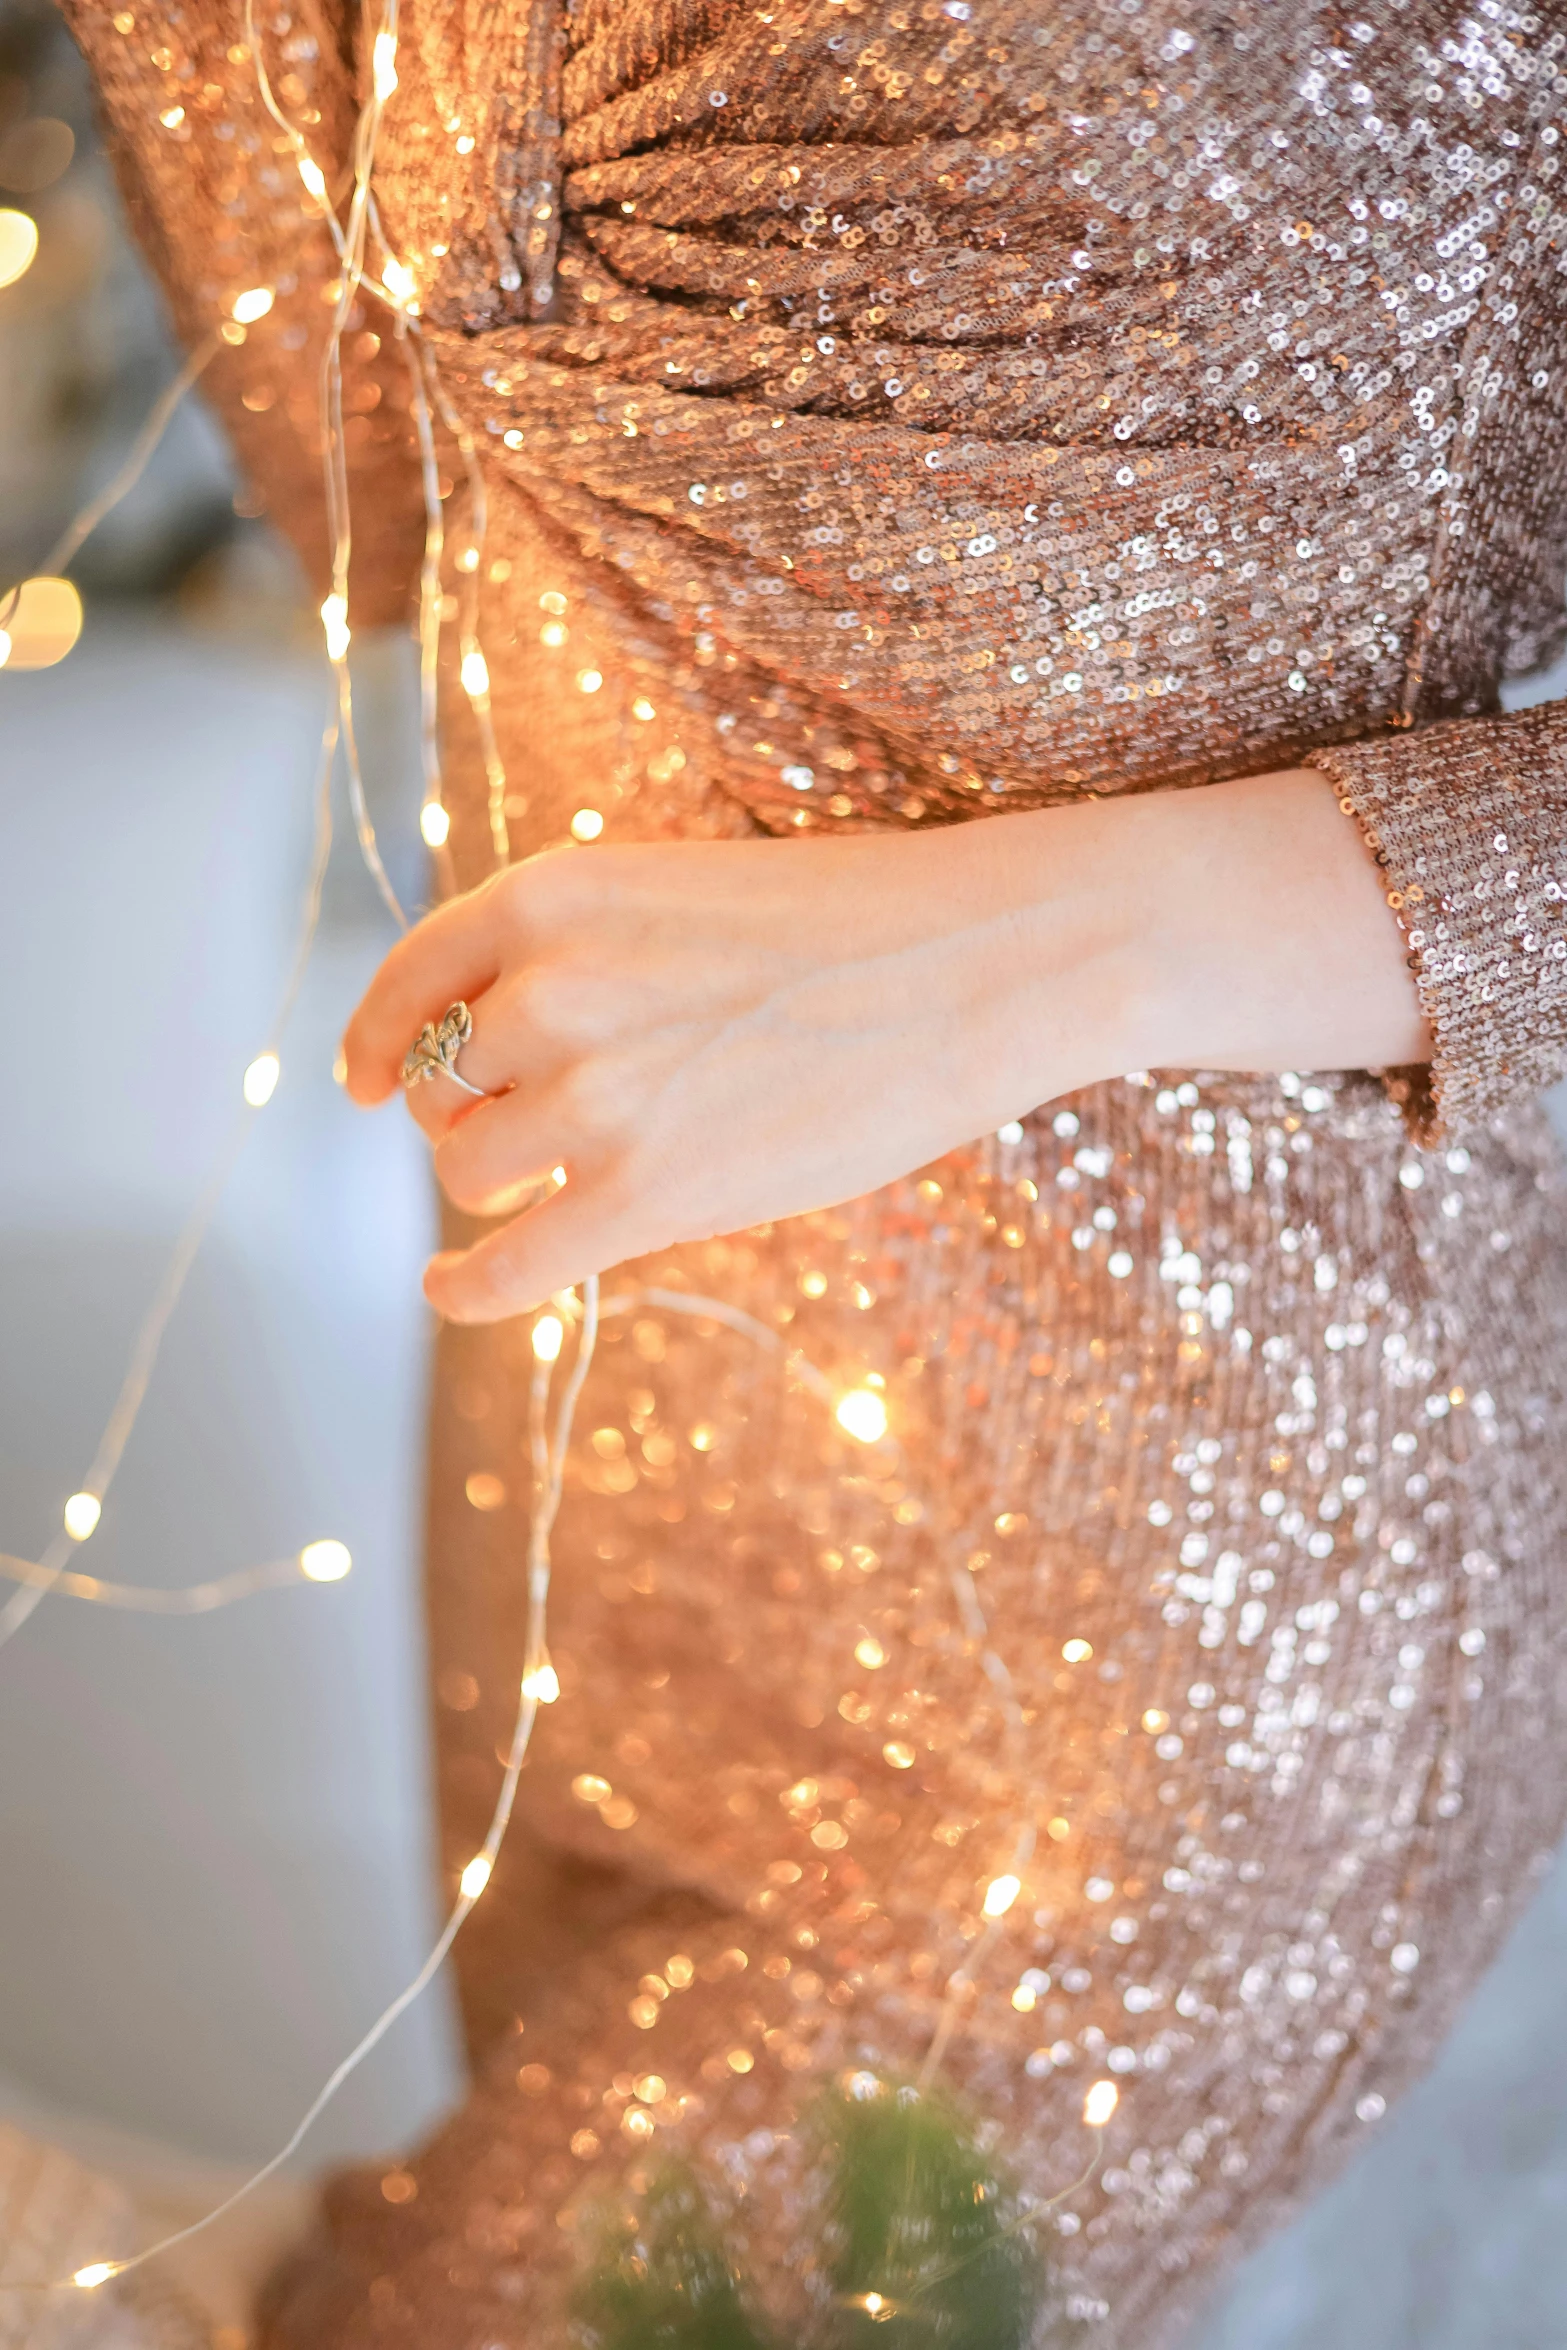 a female hand on a string attached to the ring of a light up light - garland